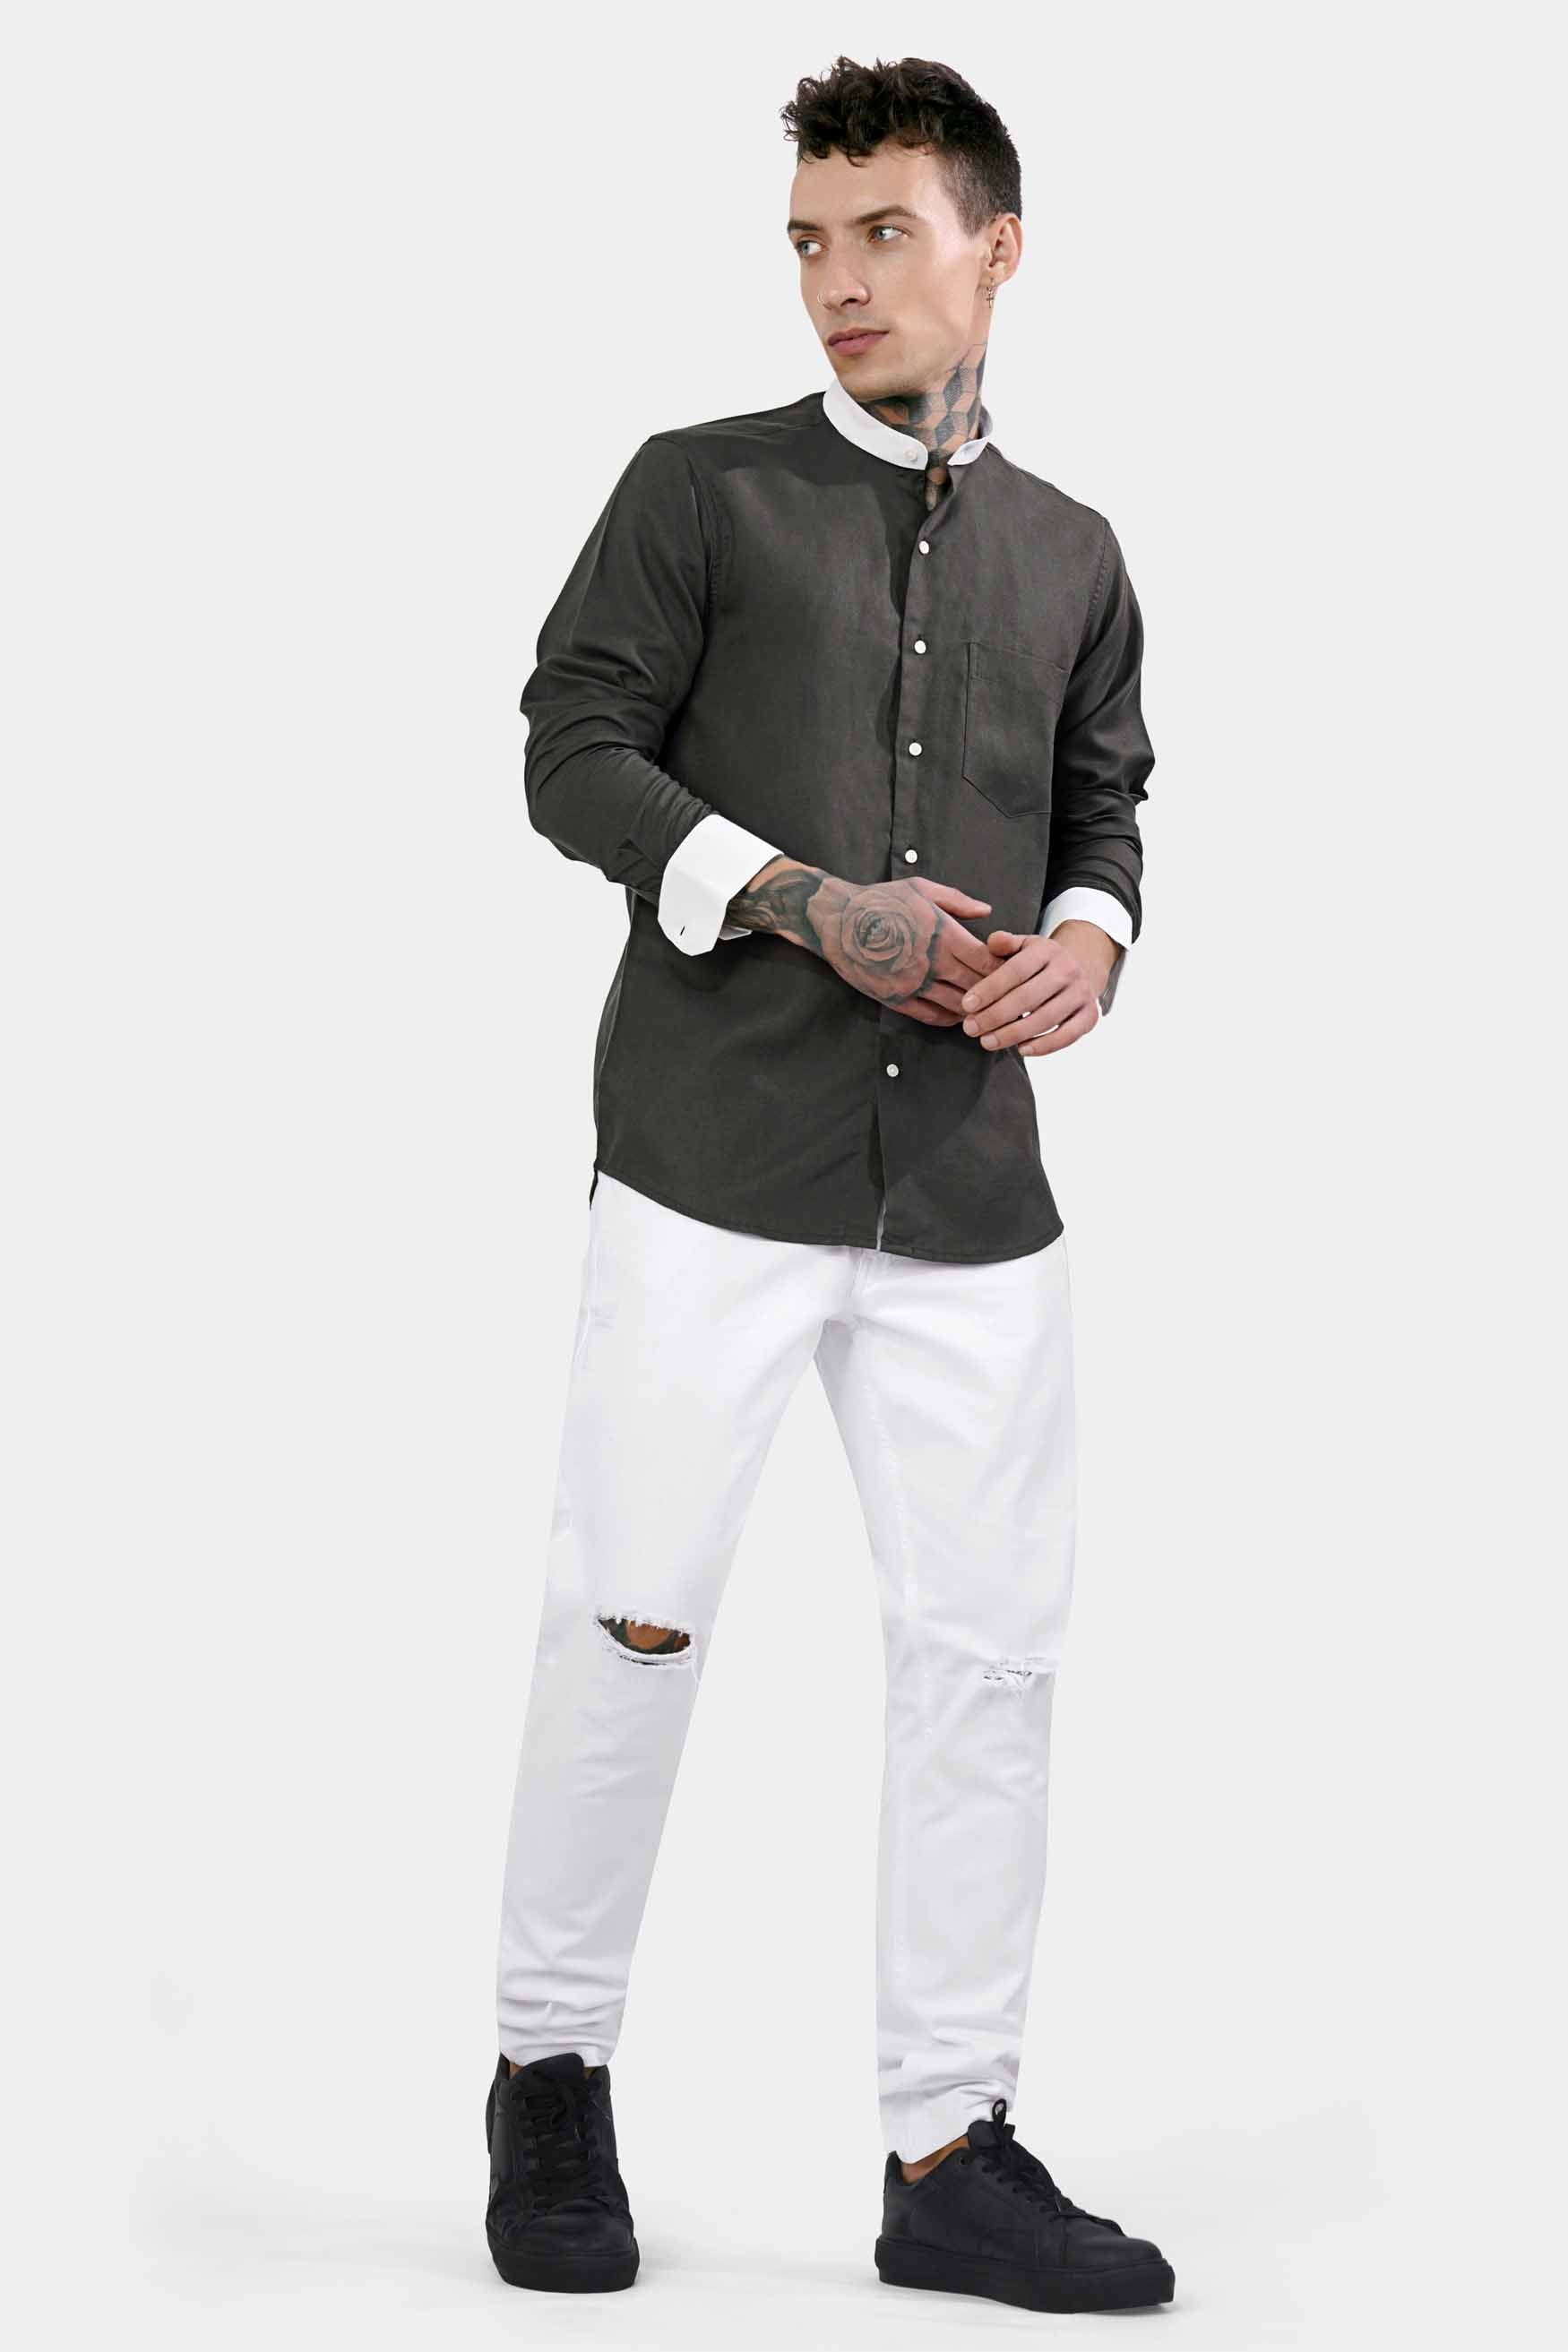 Zeus Gray with White Cuffs and Collar Luxurious Linen Shirt 11460-M-WCC-38, 11460-M-WCC-H-38, 11460-M-WCC-39, 11460-M-WCC-H-39, 11460-M-WCC-40, 11460-M-WCC-H-40, 11460-M-WCC-42, 11460-M-WCC-H-42, 11460-M-WCC-44, 11460-M-WCC-H-44, 11460-M-WCC-46, 11460-M-WCC-H-46, 11460-M-WCC-48, 11460-M-WCC-H-48, 11460-M-WCC-50, 11460-M-WCC-H-50, 11460-M-WCC-52, 11460-M-WCC-H-52